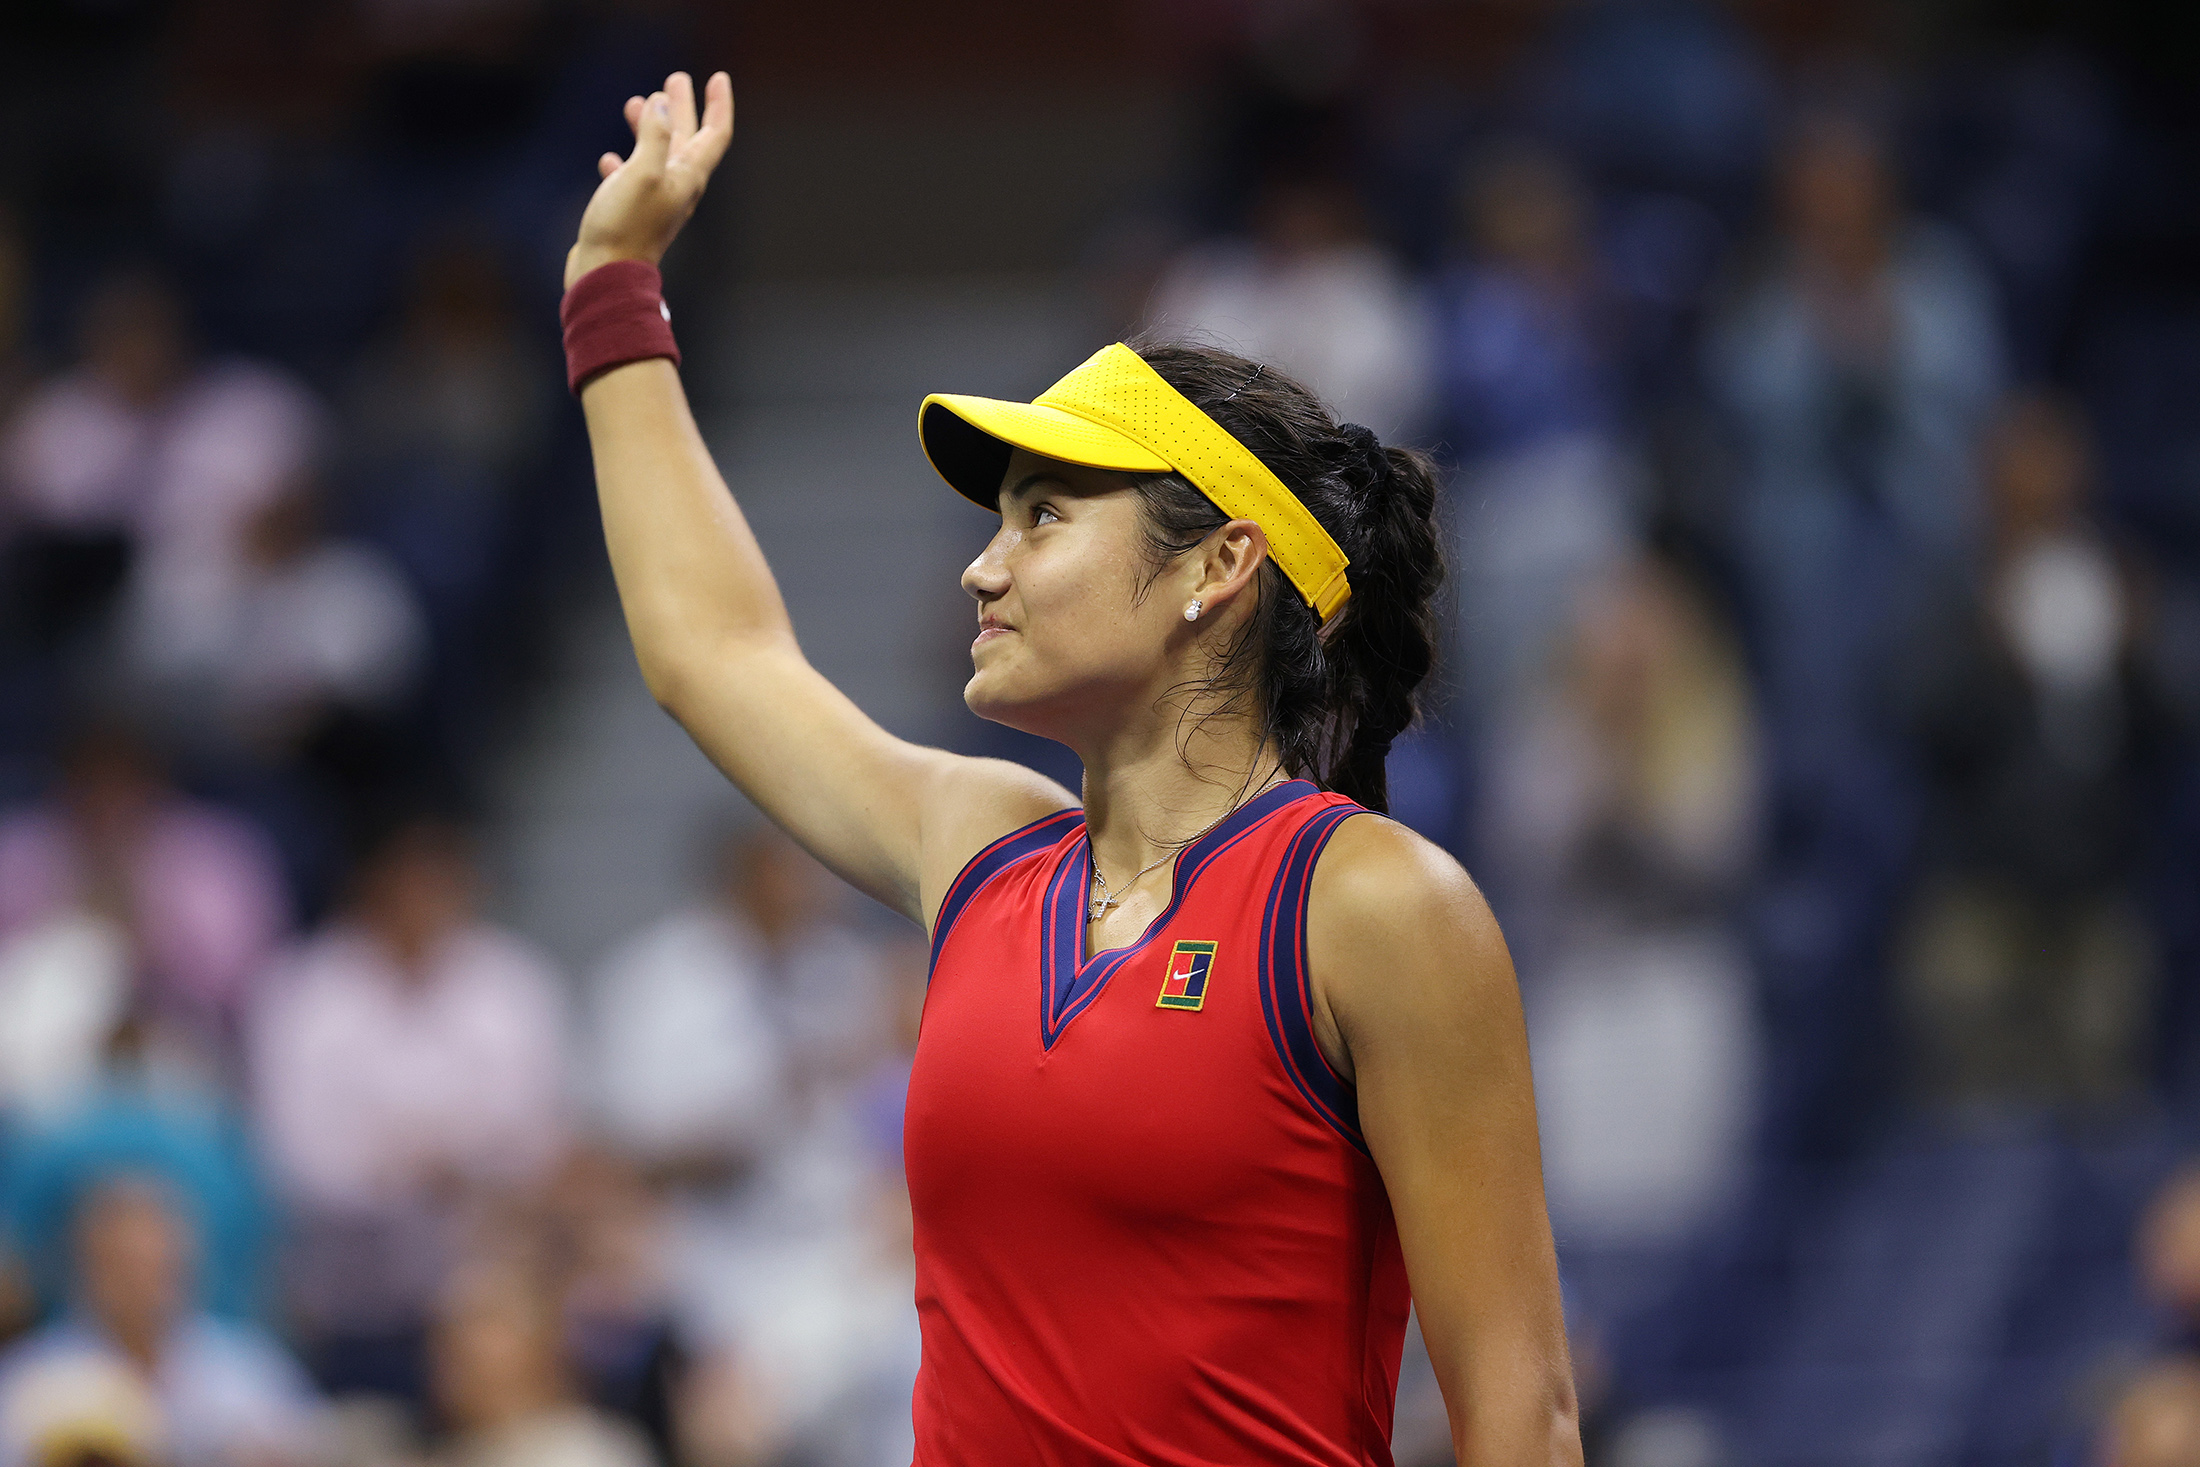 Emma Raducanu celebrates defeating Maria Sakkari of Greece during their Women’s Singles semifinals match on Day Eleven of the 2021 US Open on Sept. 9.